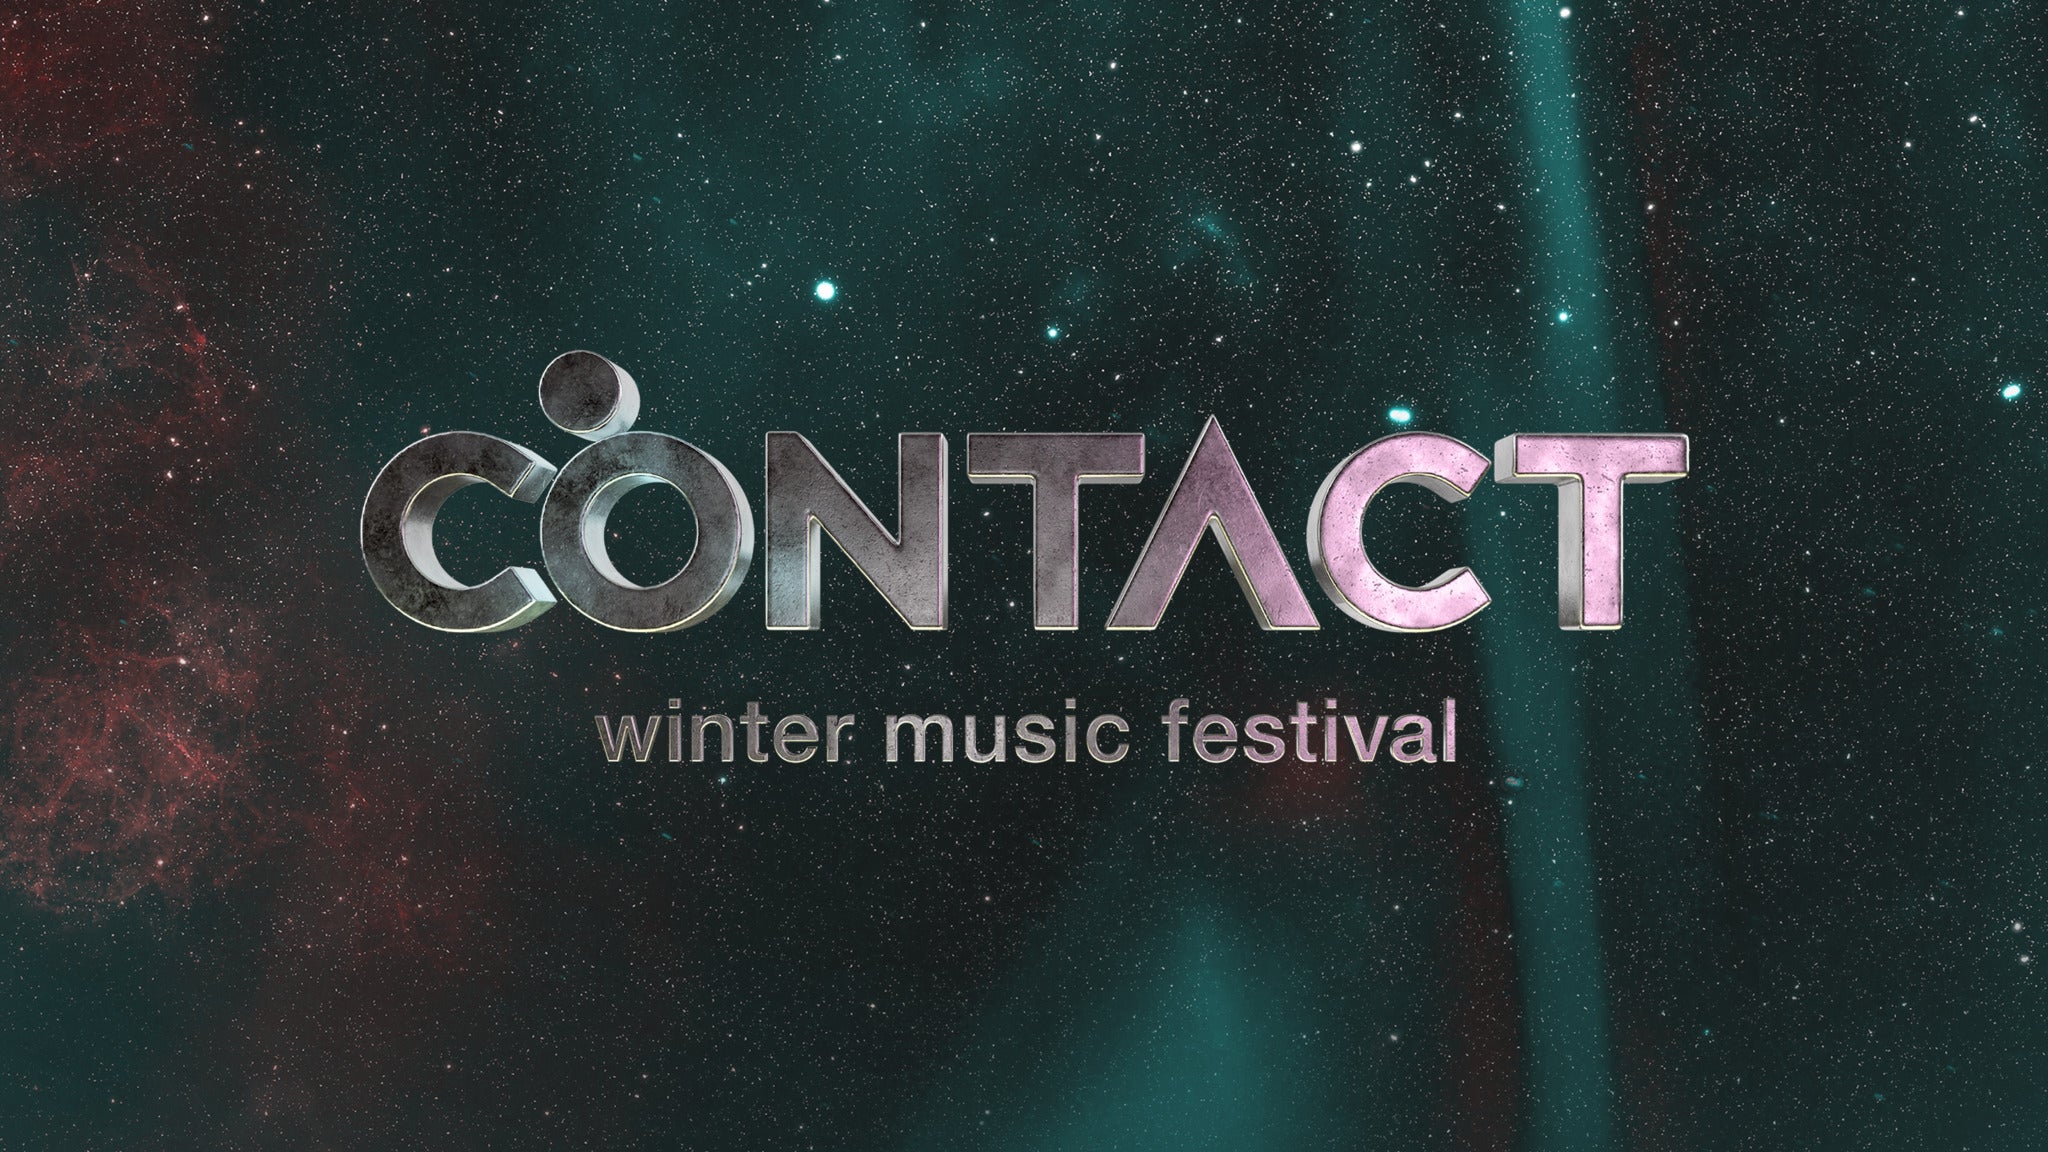 Contact Festival: Single Day Ticket - December 30, 2022 in Vancouver promo photo for VIP Package presale offer code